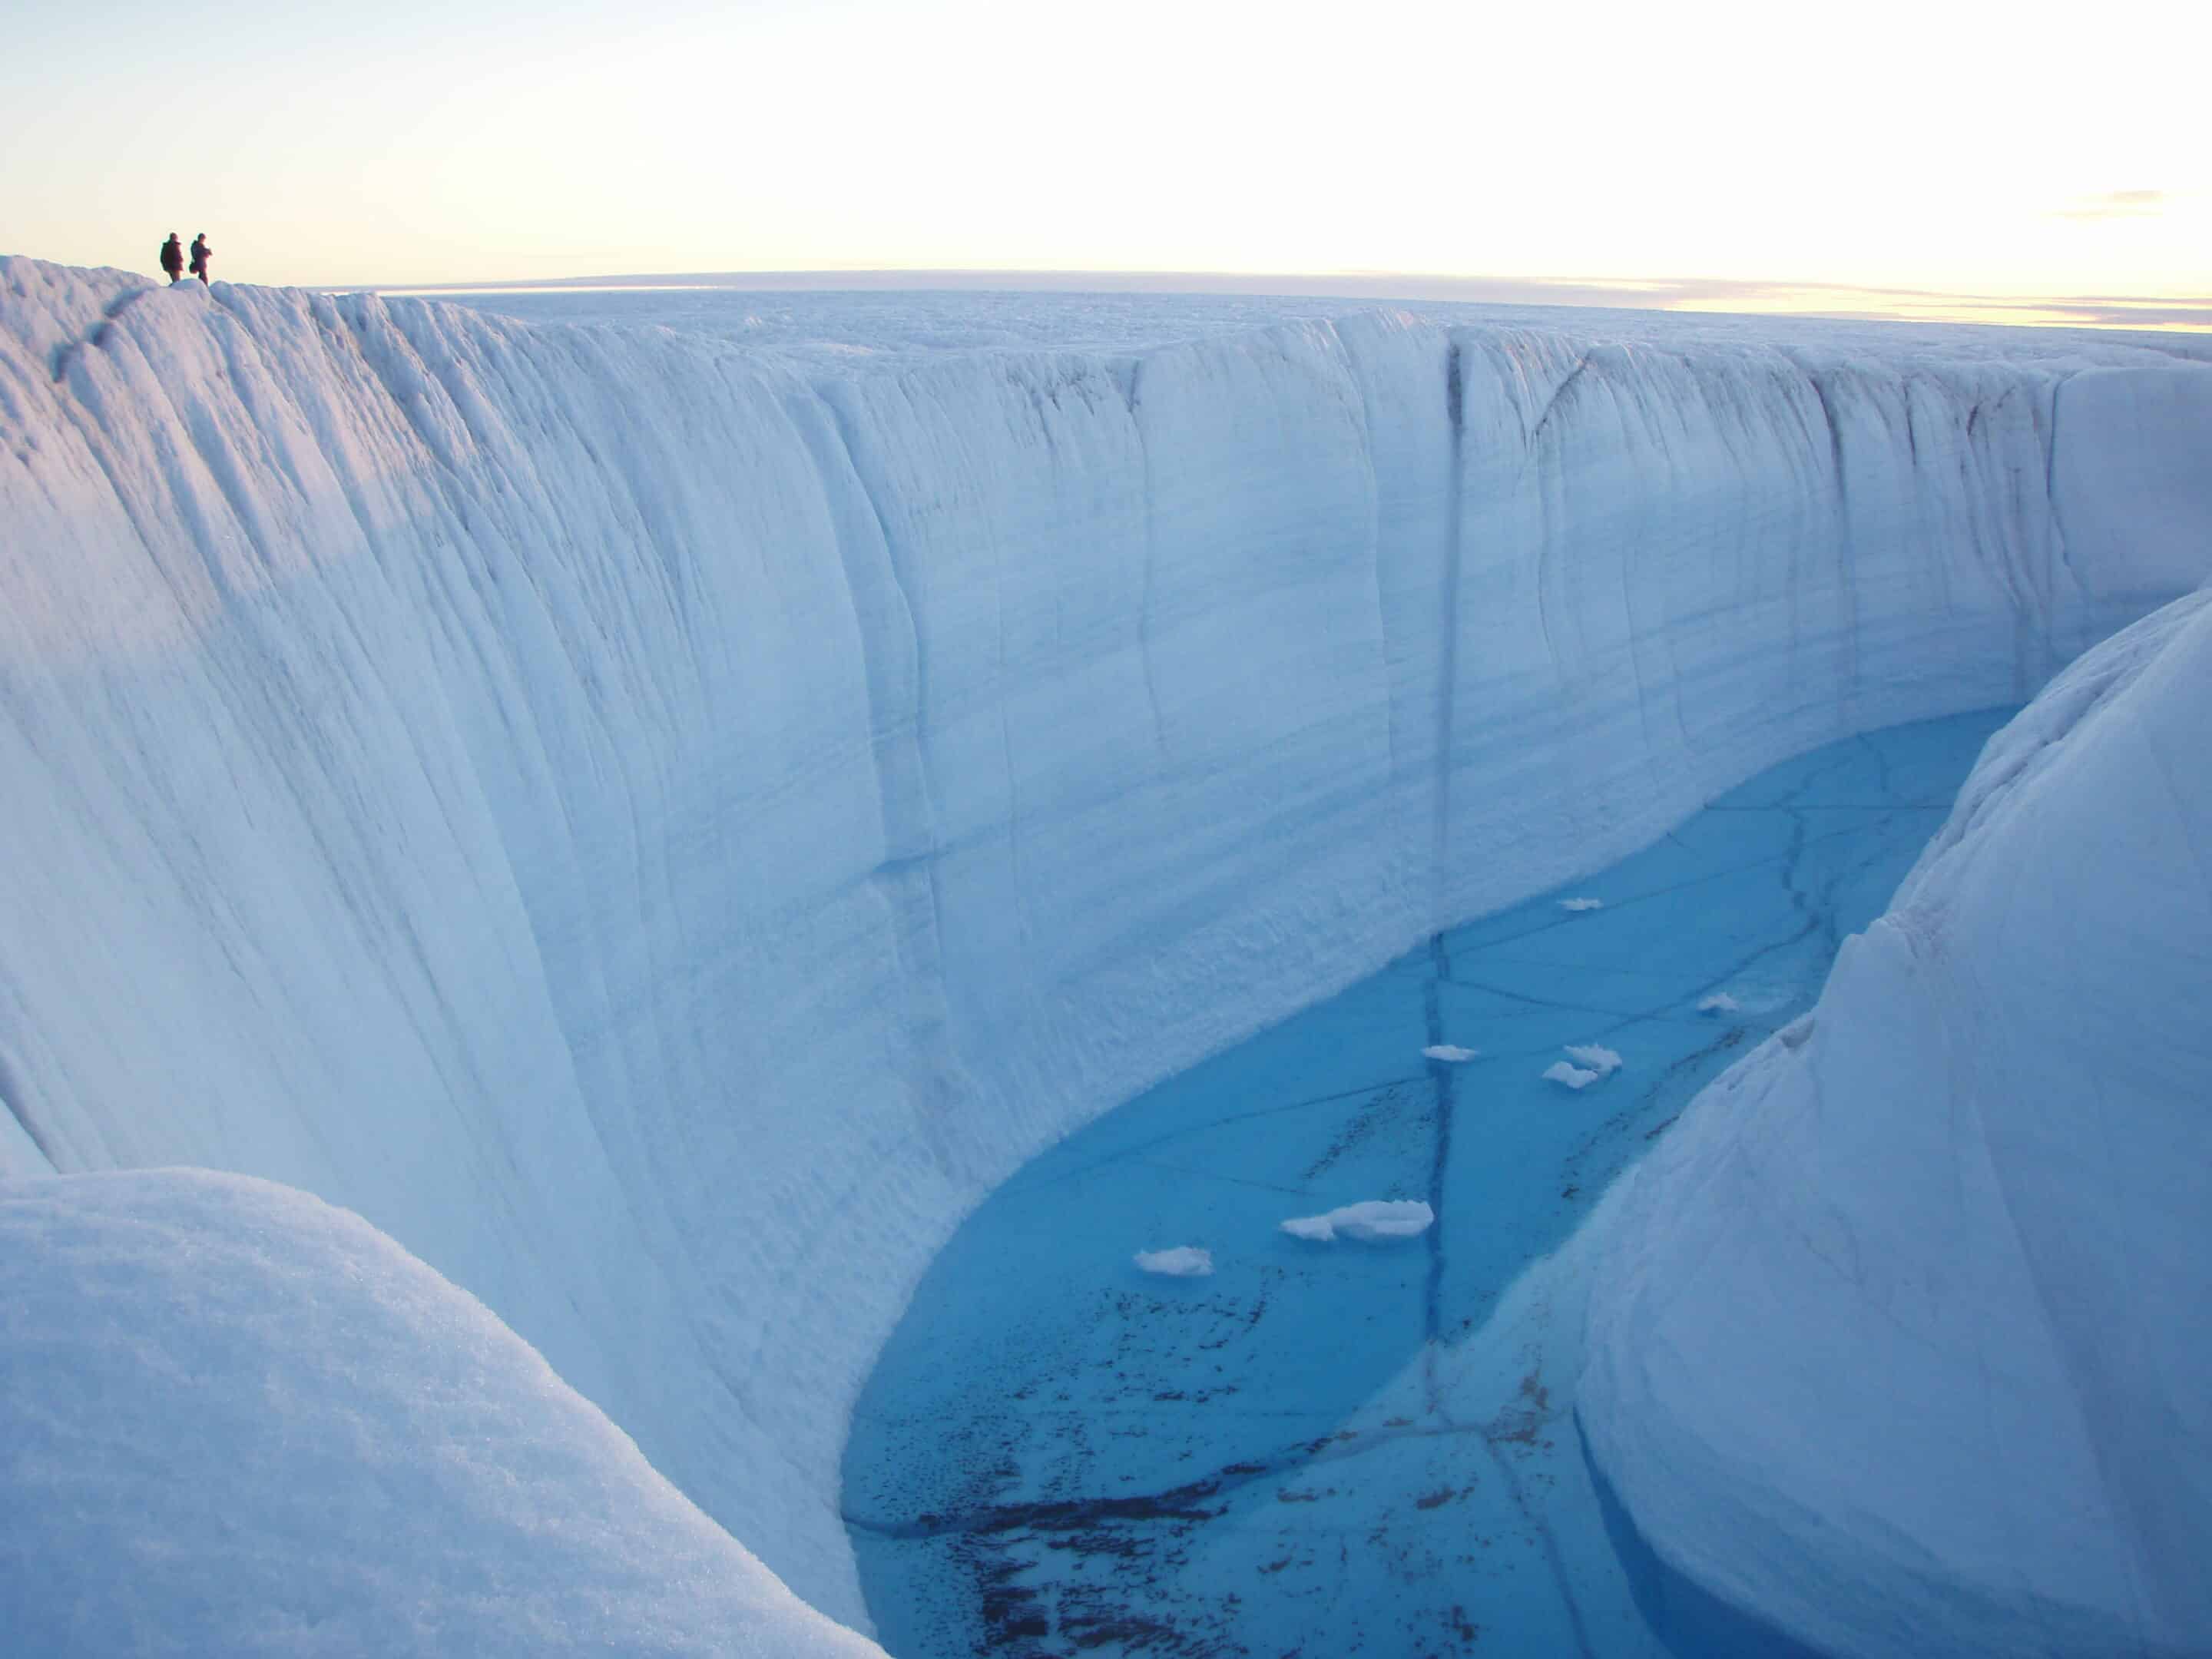 Meltwater lakes on the Greenland ice sheet. Credit: Sarah Das/Woods Hole Oceanographic Institution.